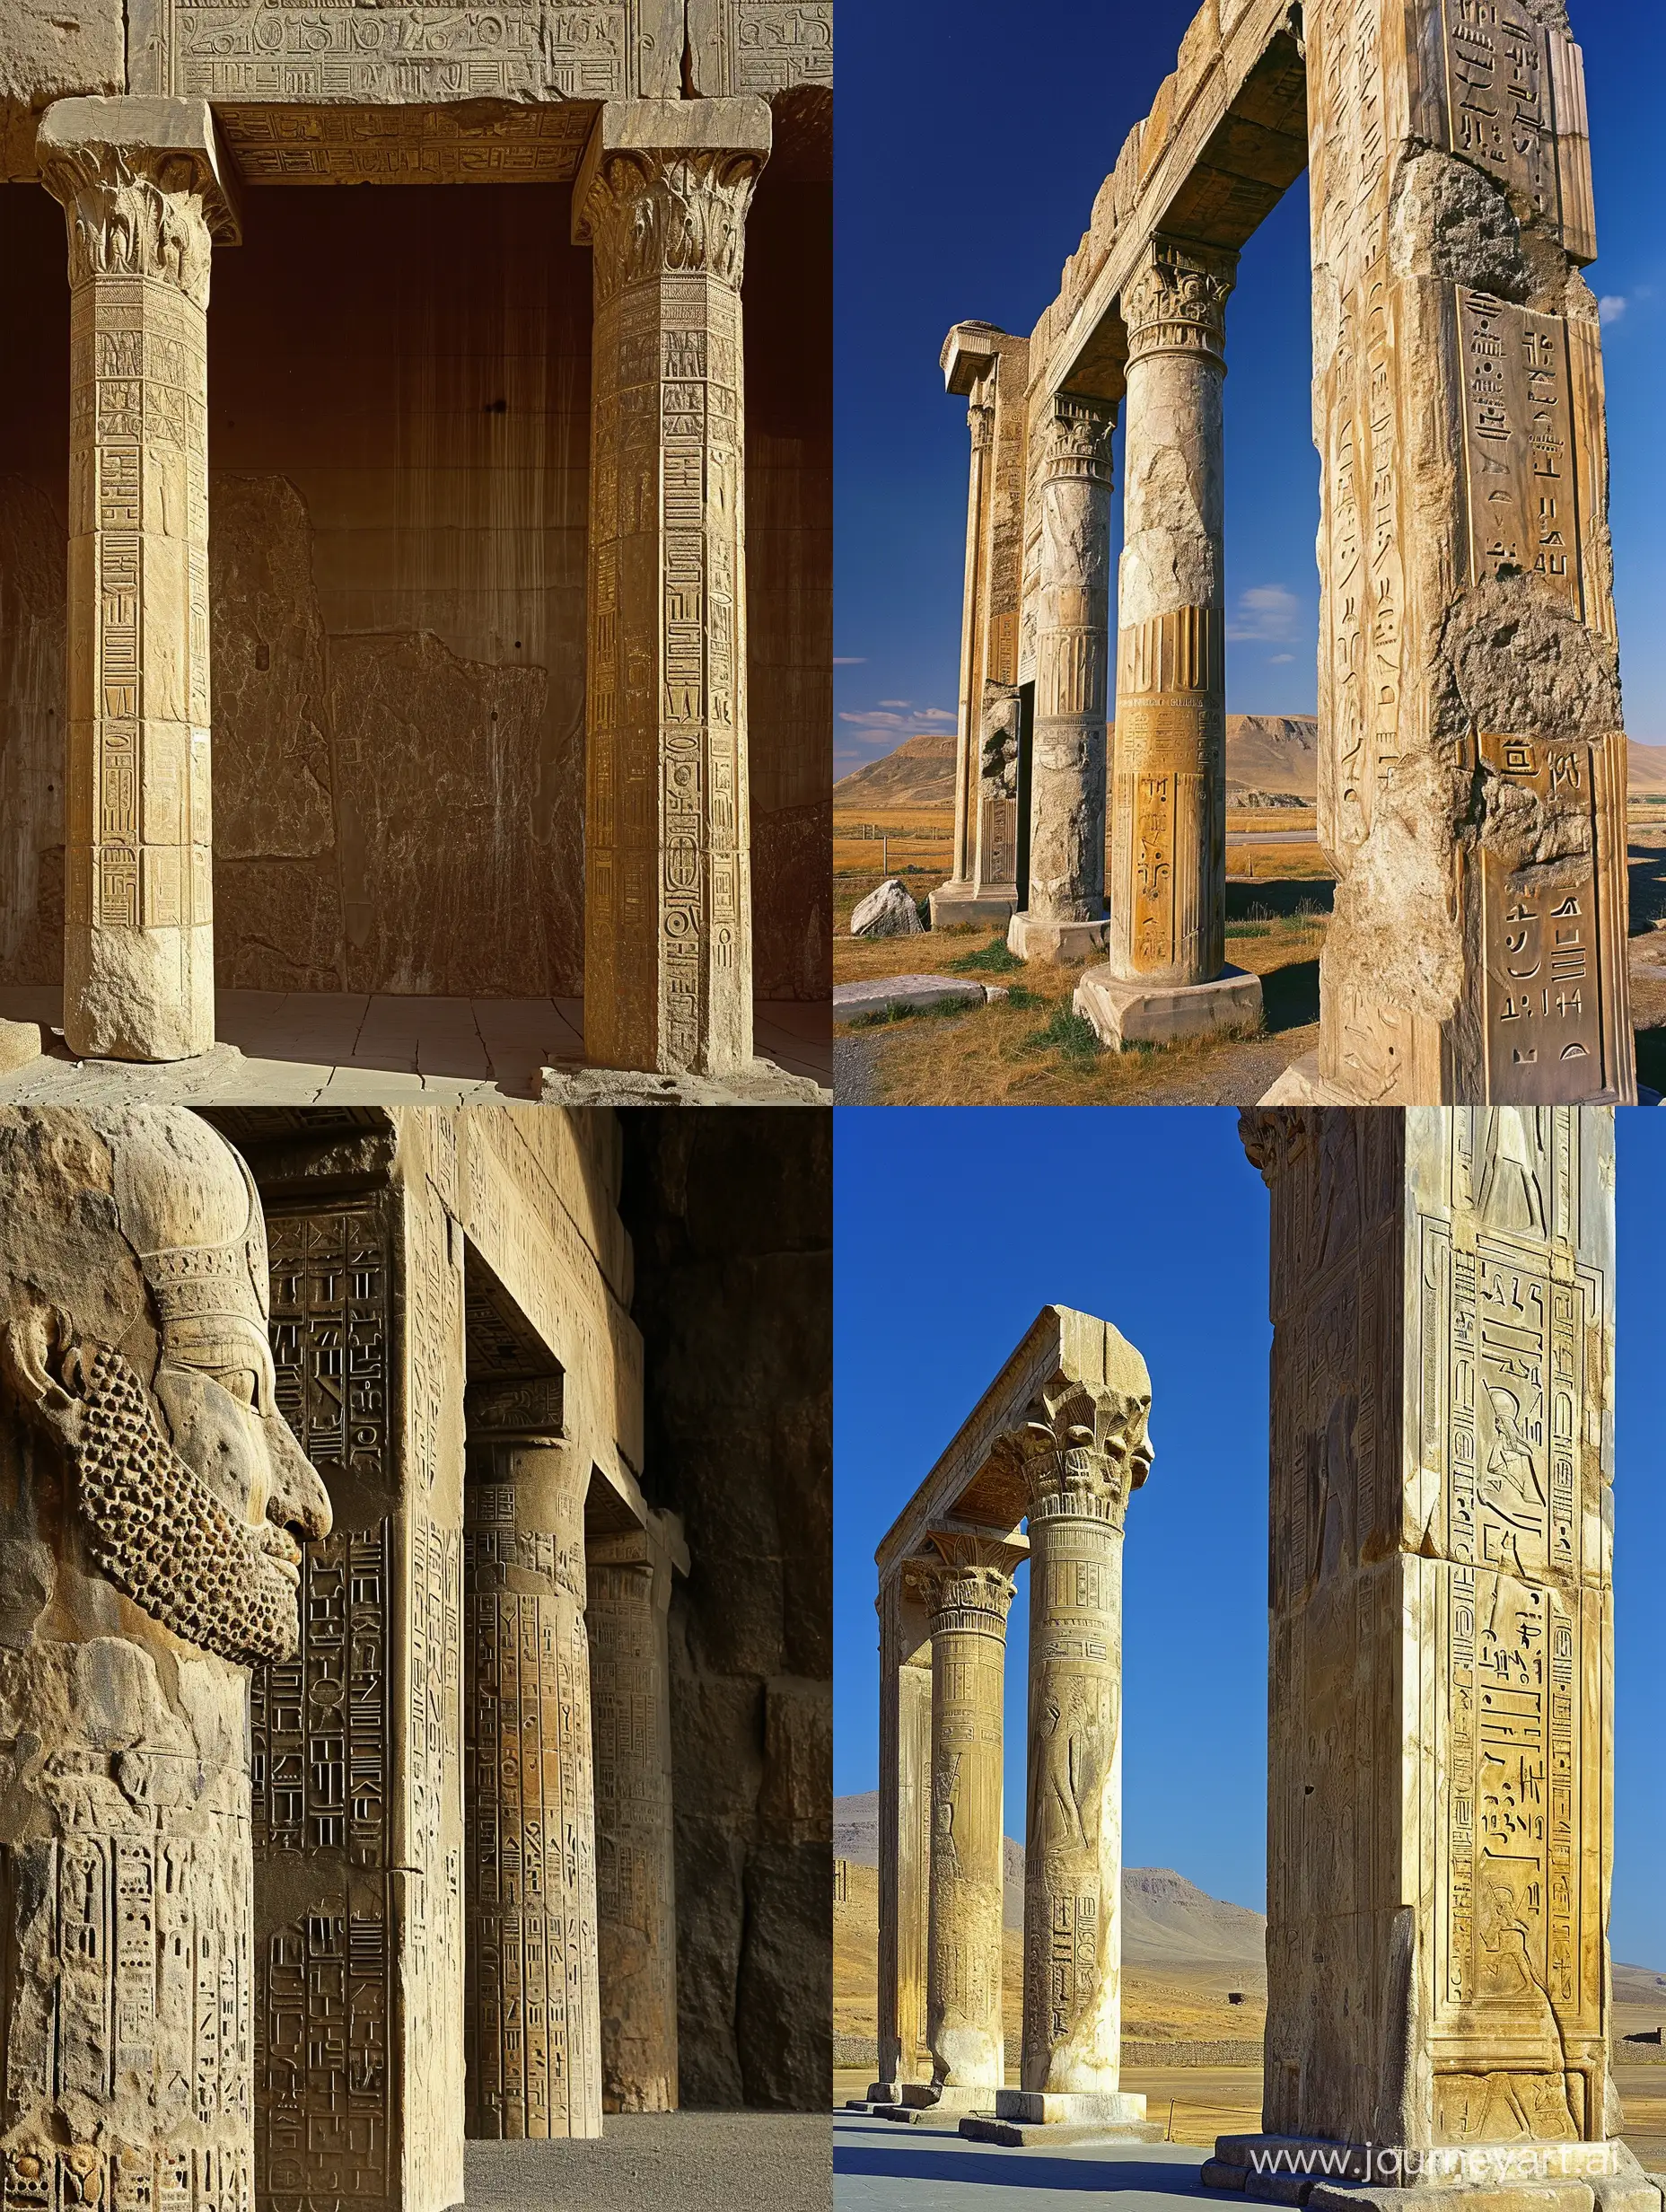 Column heads and large gates from the Achaemenid civilization, which are engraved with cuneiform